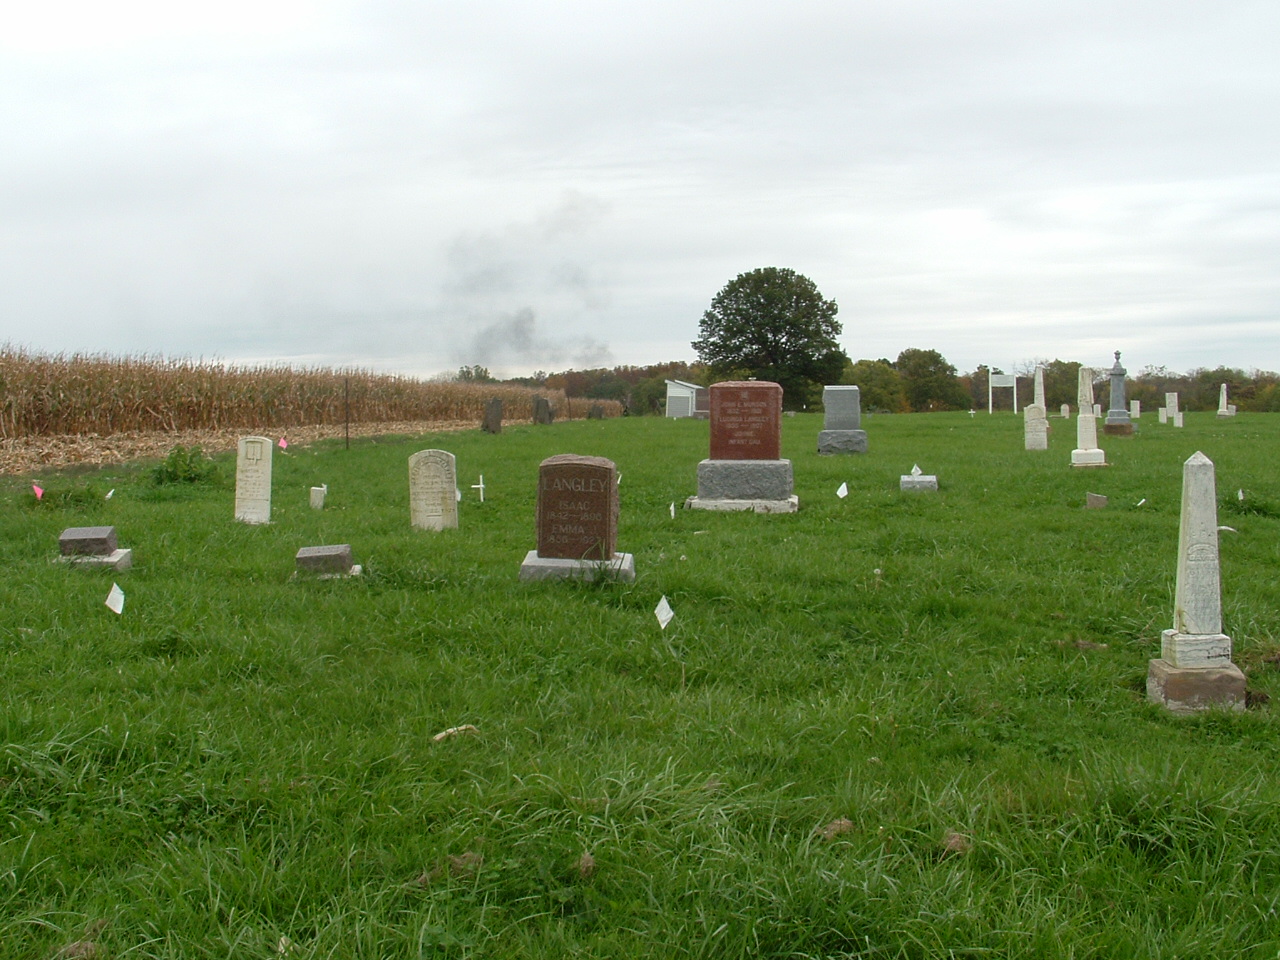 October 14, 2008 view of the cemetery